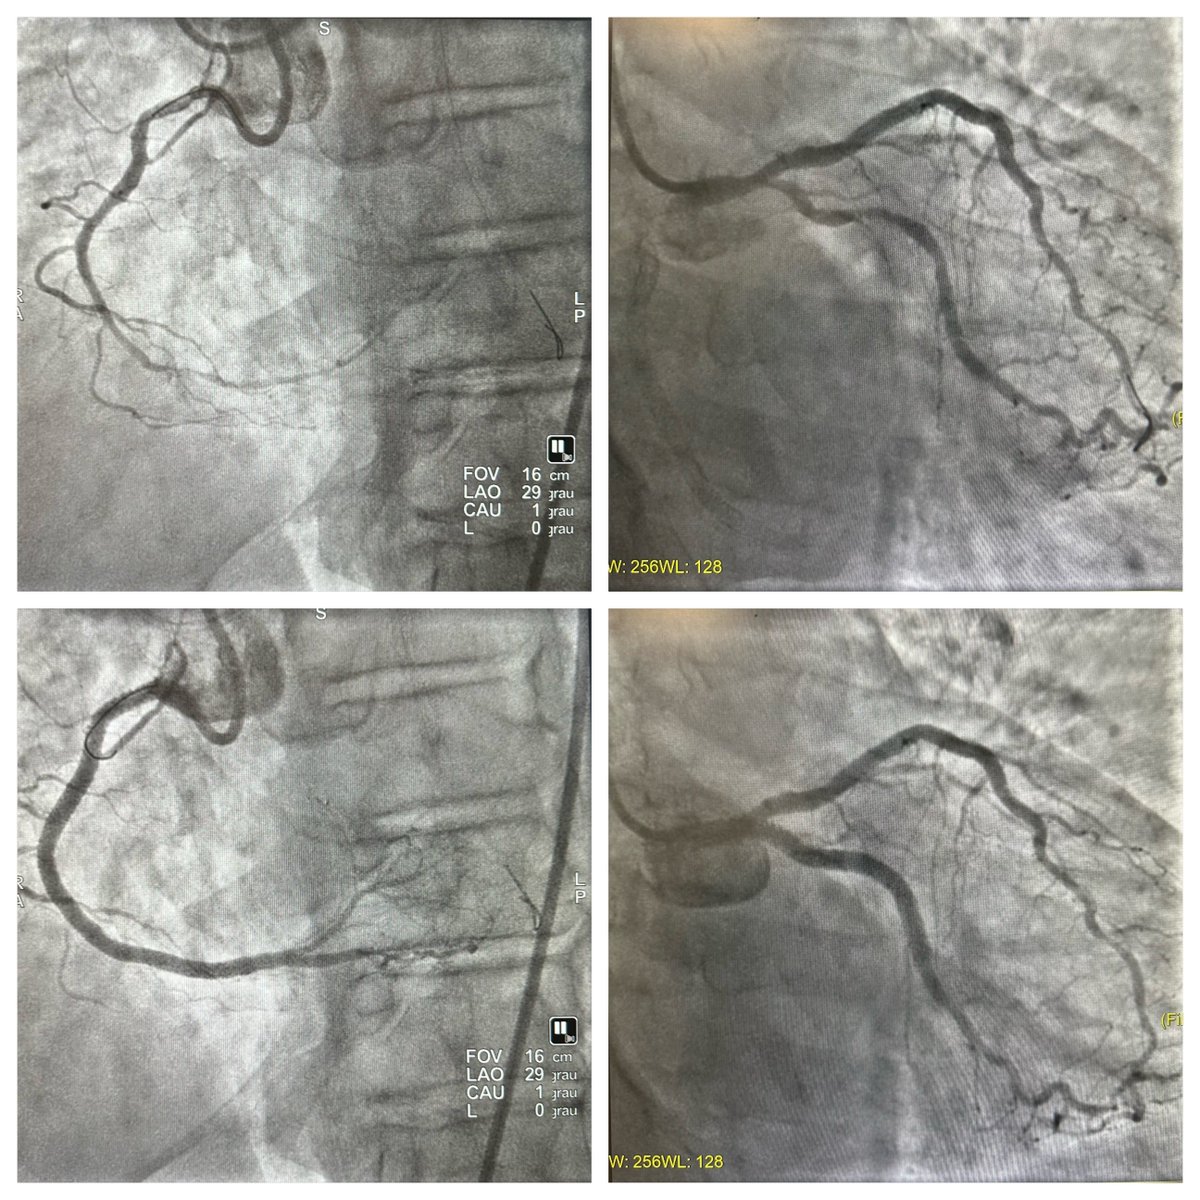 67👨🏼‍🦳. MV PCI. RCA CTO crossed w/ Finecross & FXTR. LM-LCx provisional stenting with KB & DCB to ostial LAD.